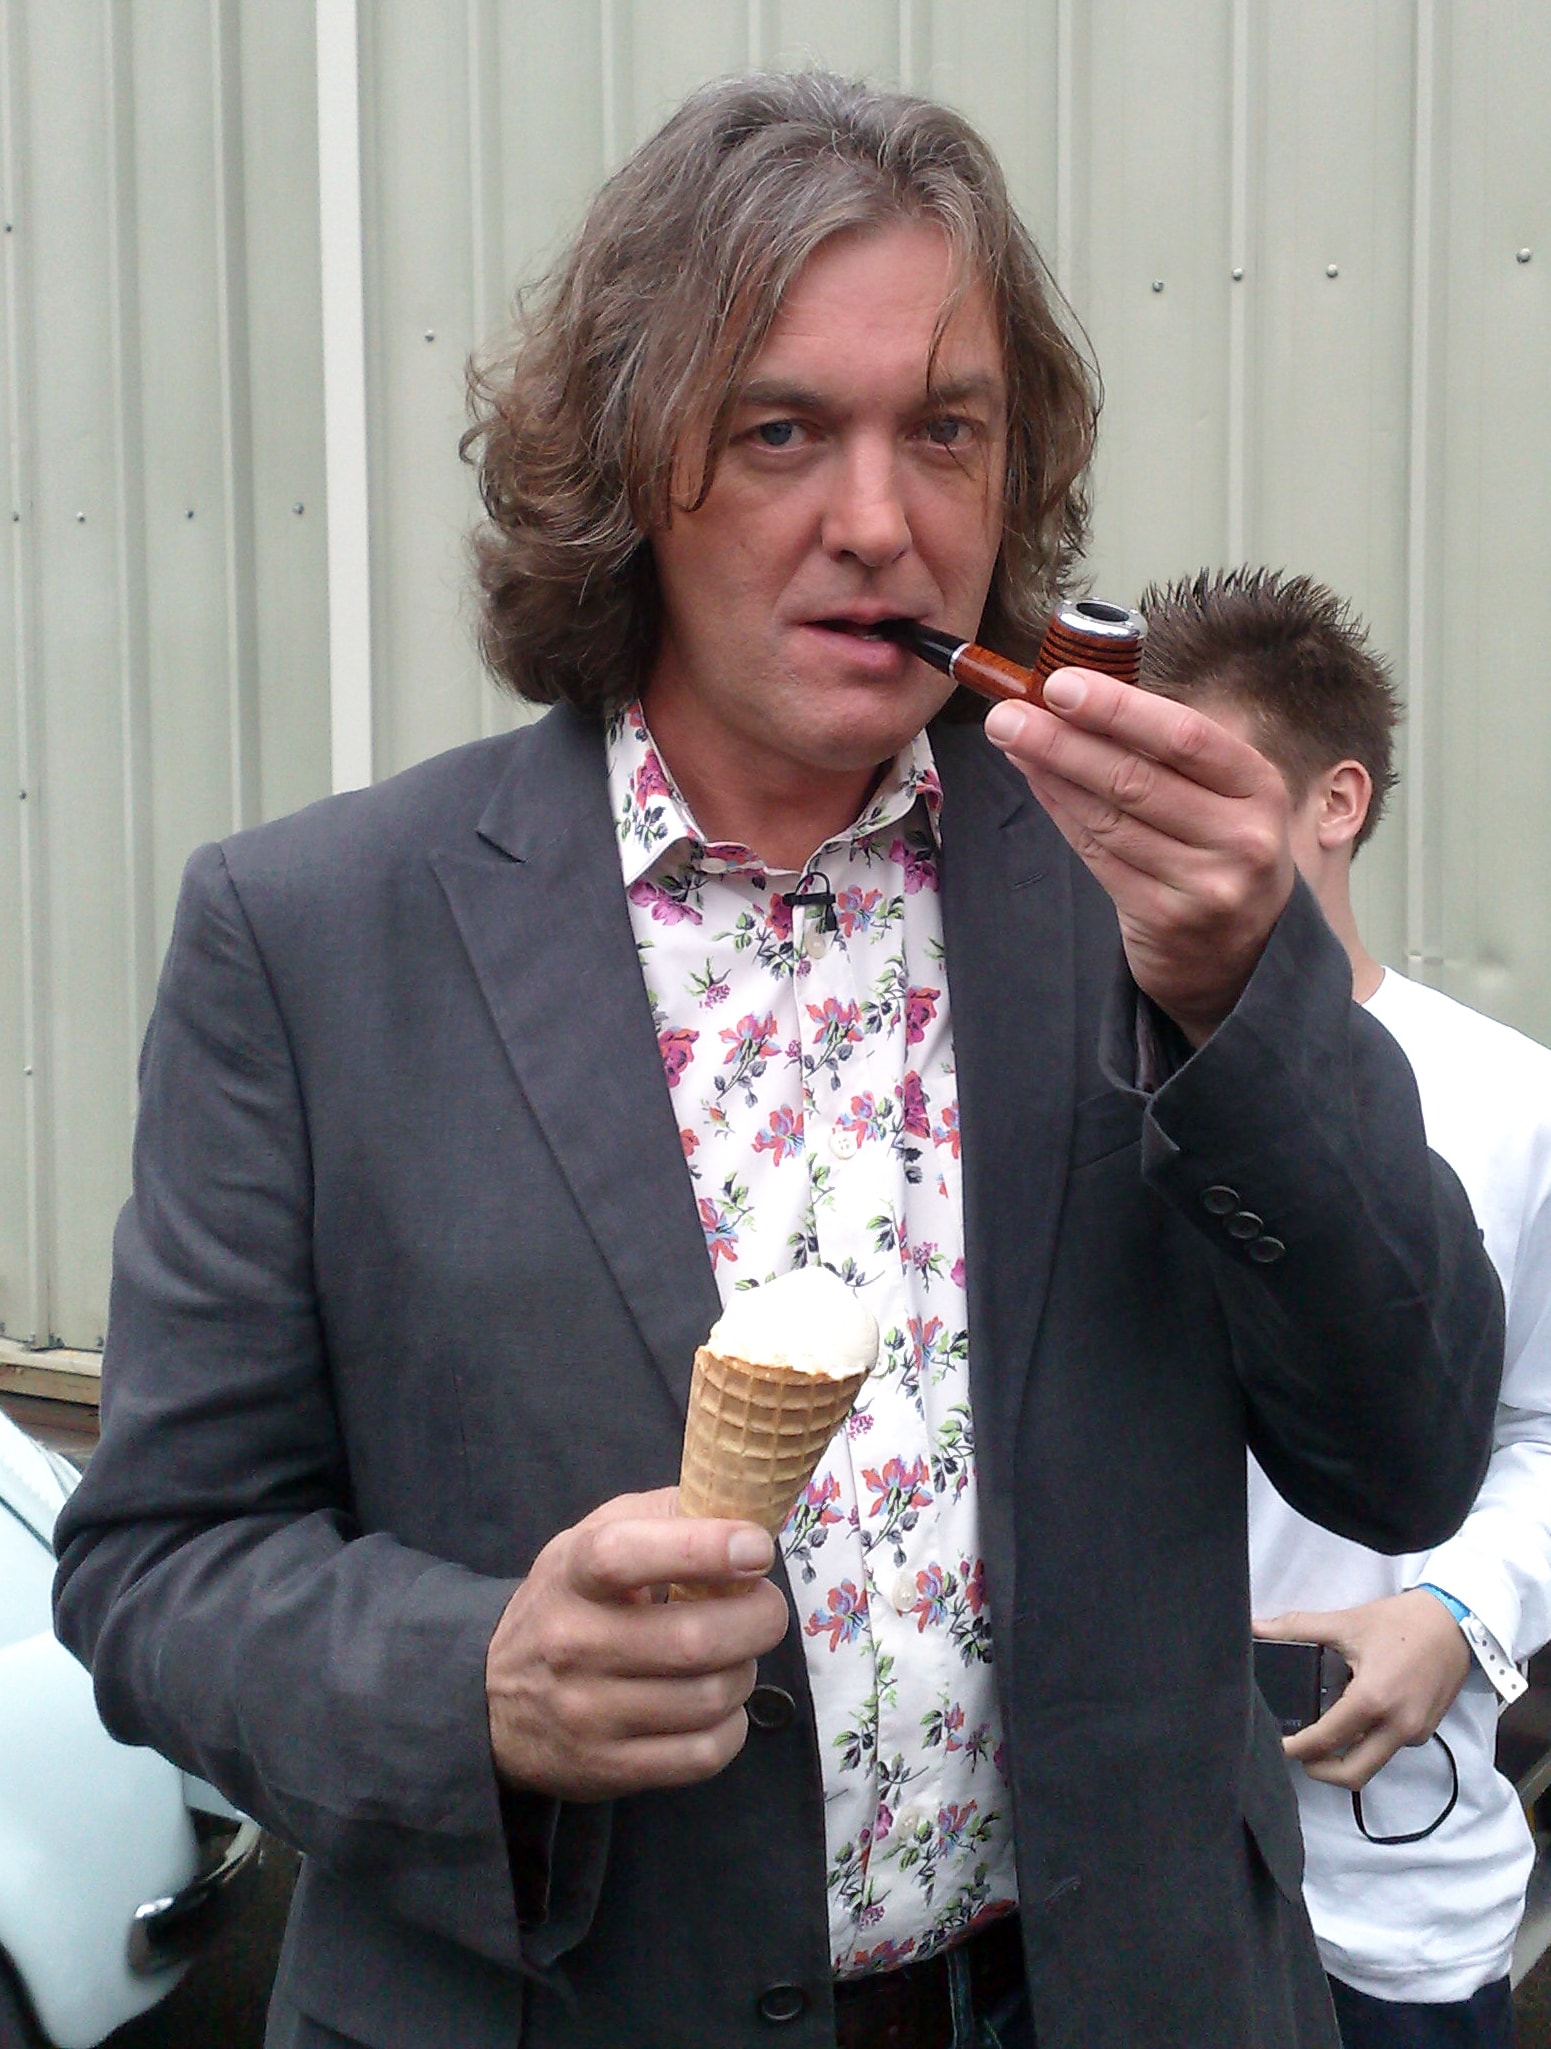 Listen to the Soothing Voice of James May  Telling You to 